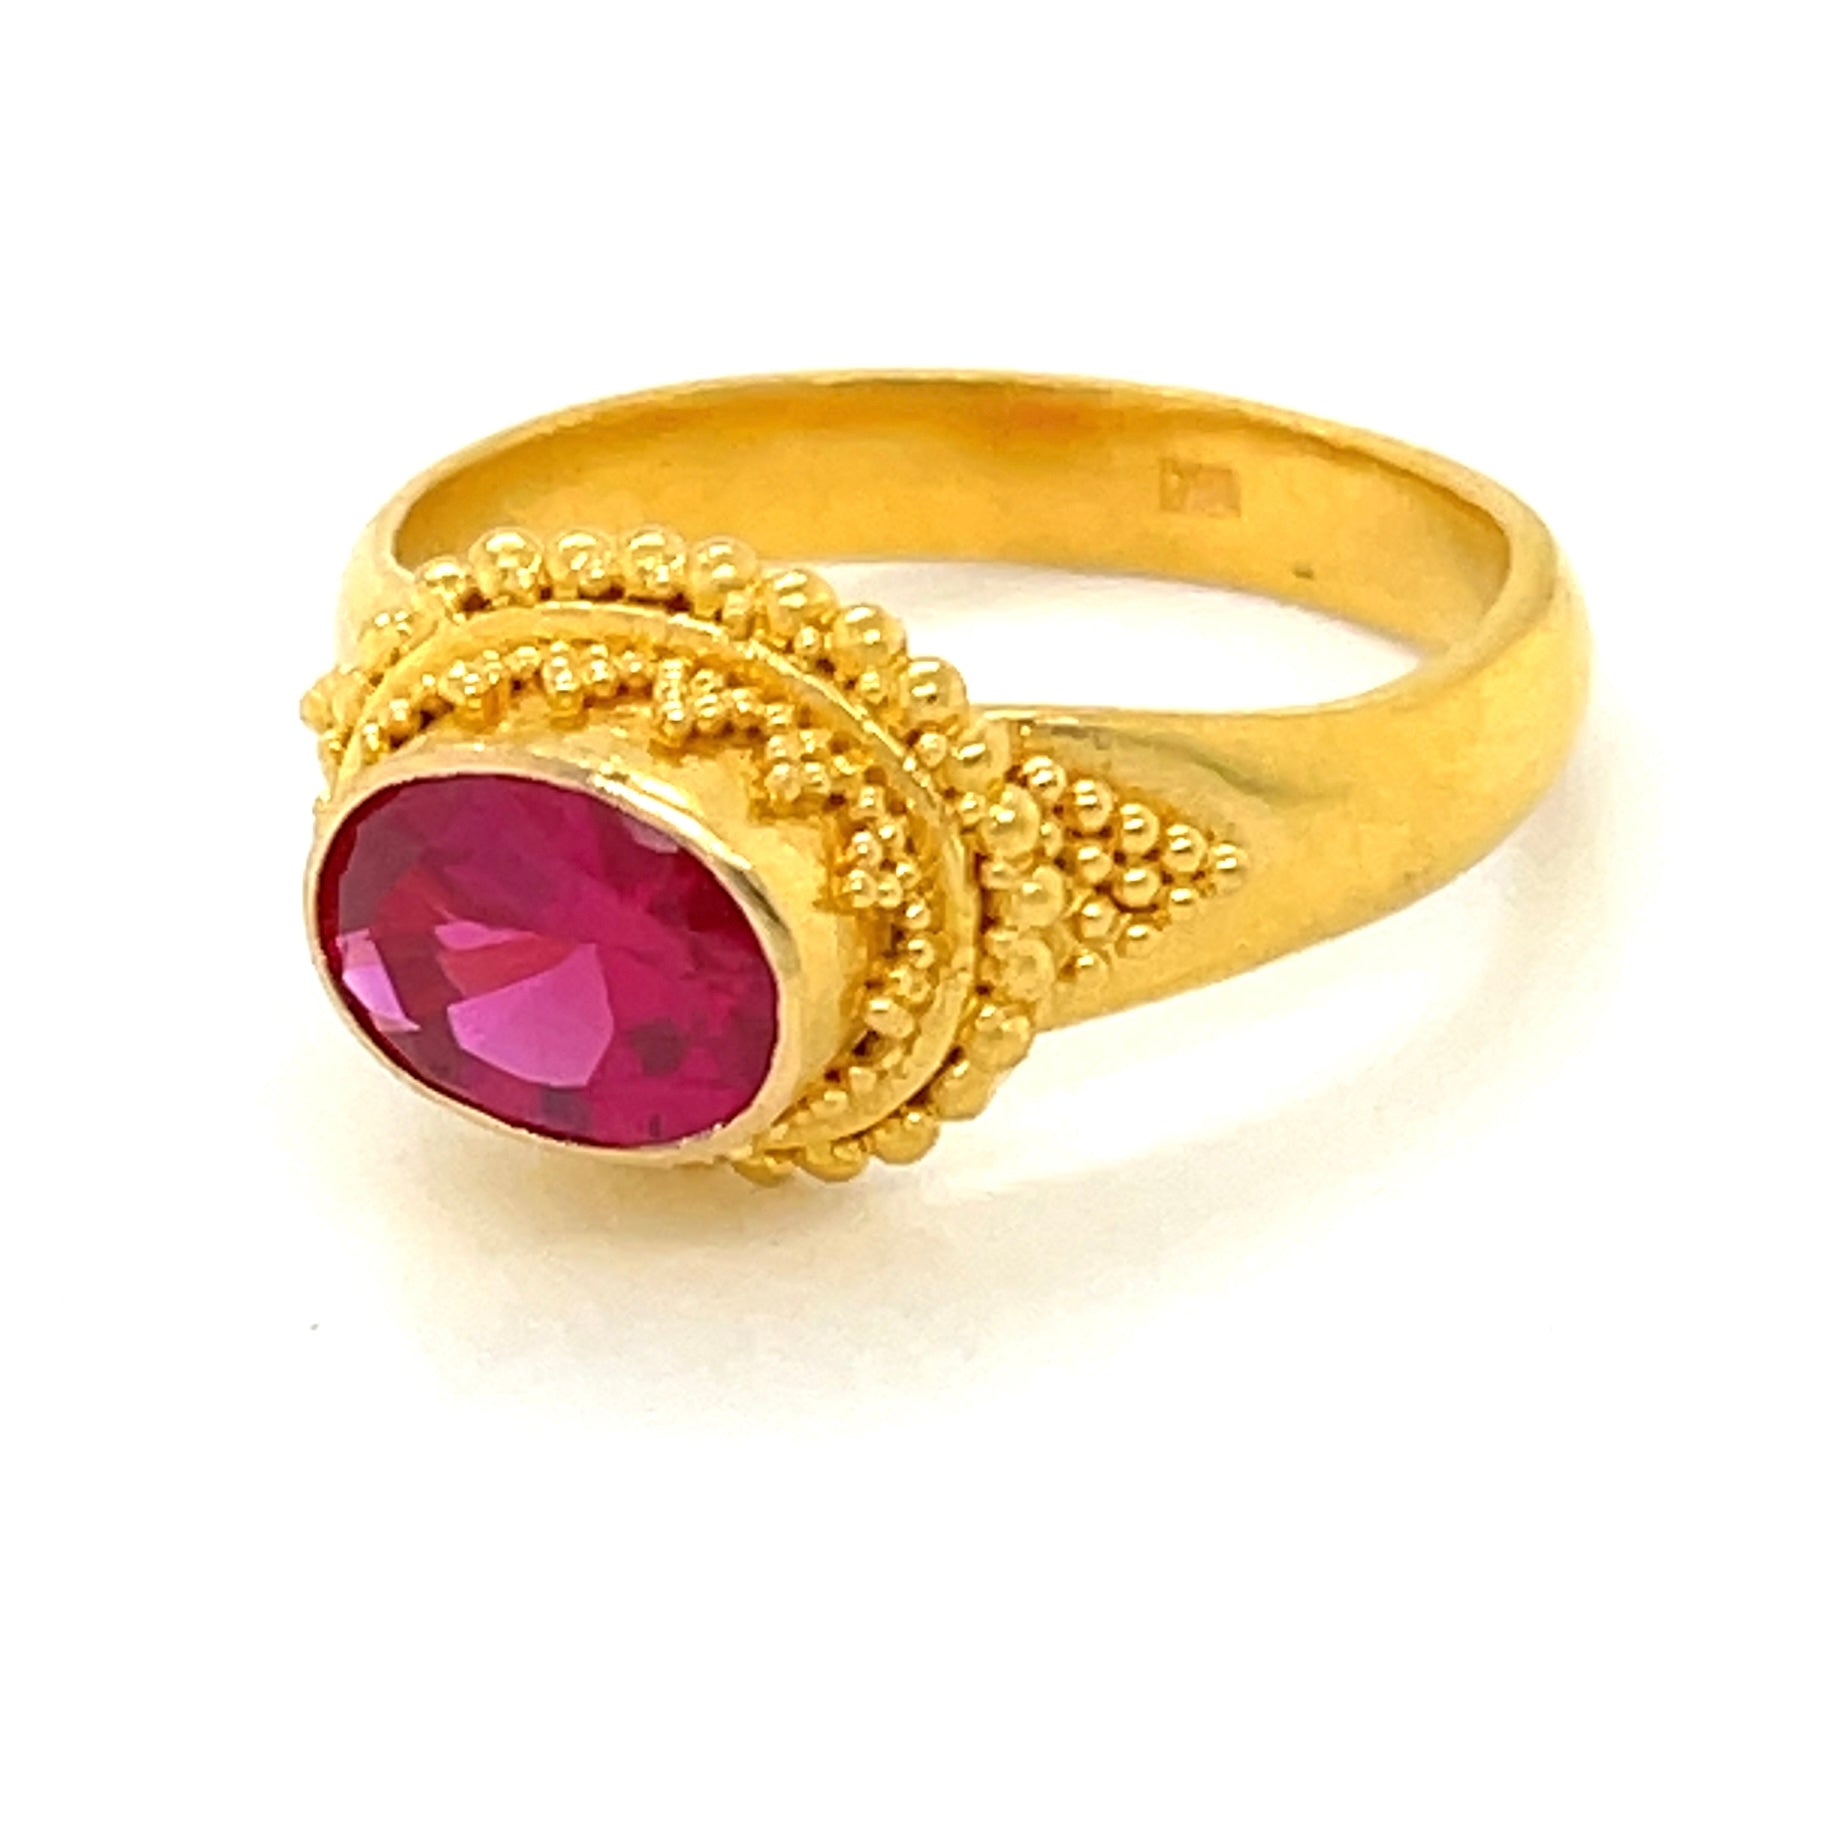 Ruby and gold ring